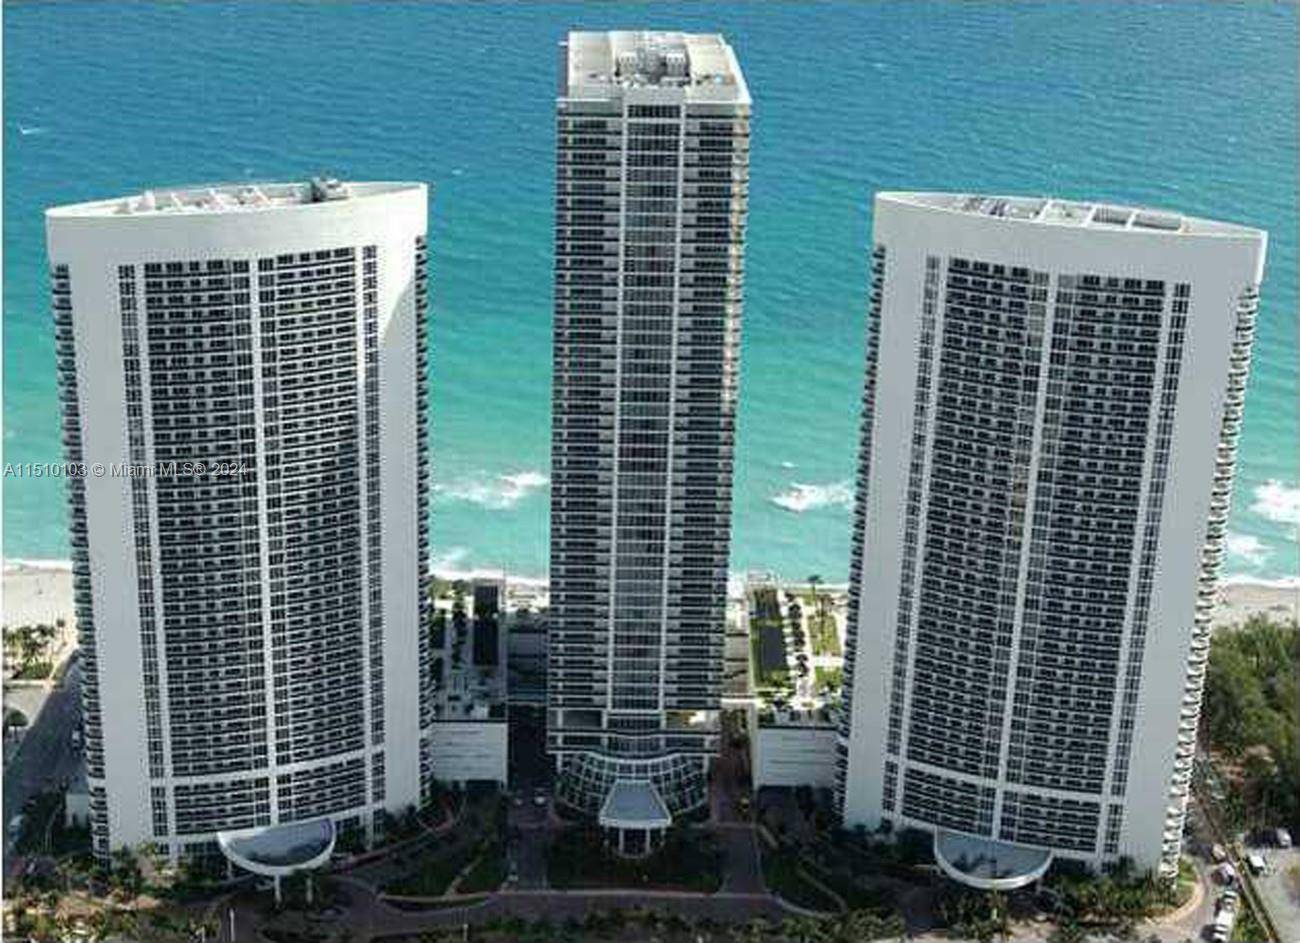 Fantastic View from 41 floor balconies on the Ocean and Intercoast of this gorgeous 2 bed 2 bath apt located in an Ocean front AAA resort like property with 9 ...